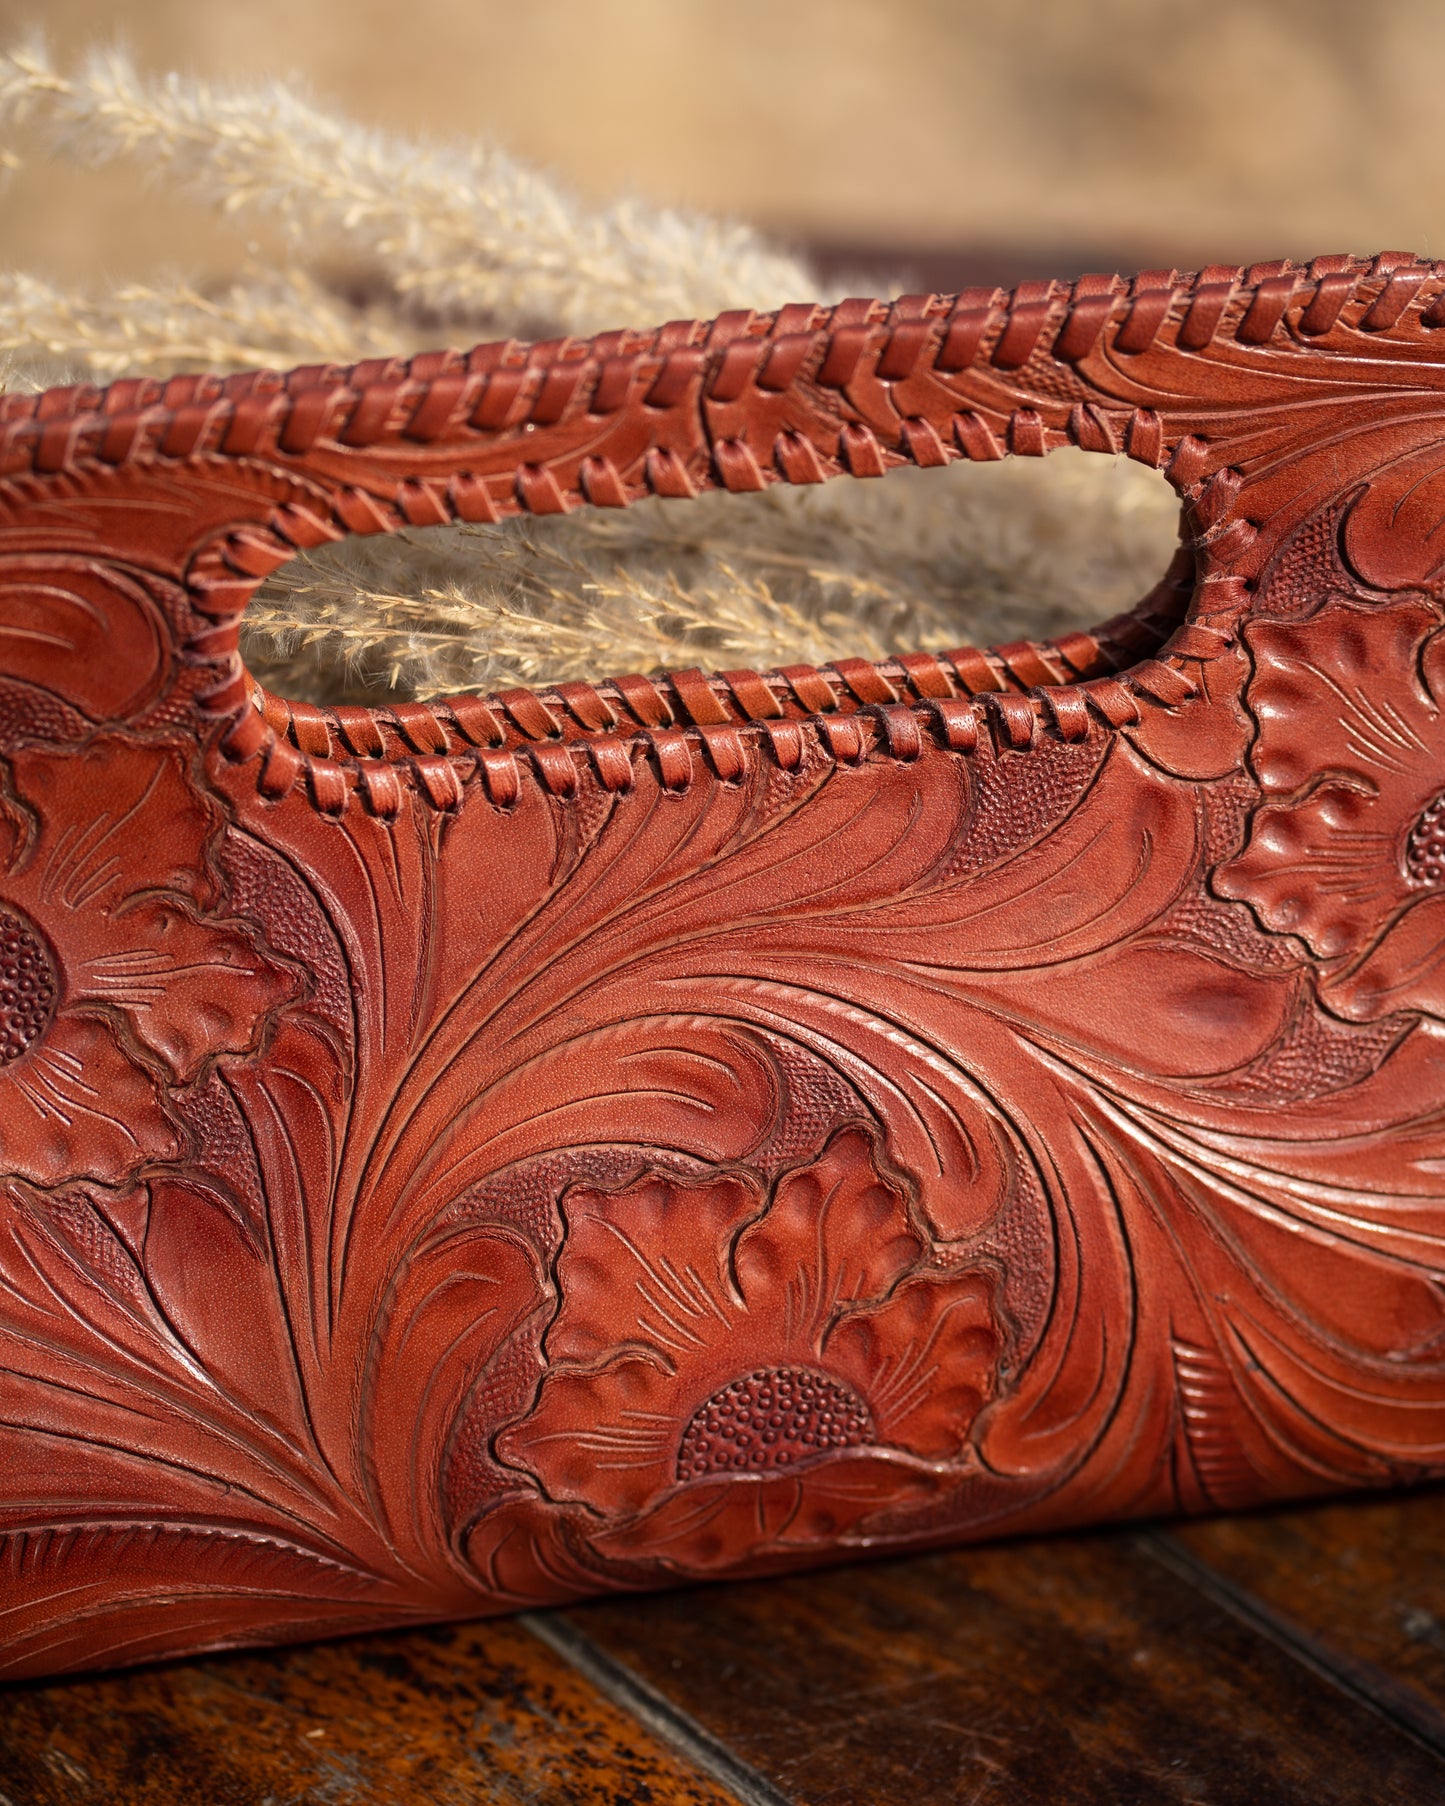 FloMotif Ruby Leather Tooled Clutch